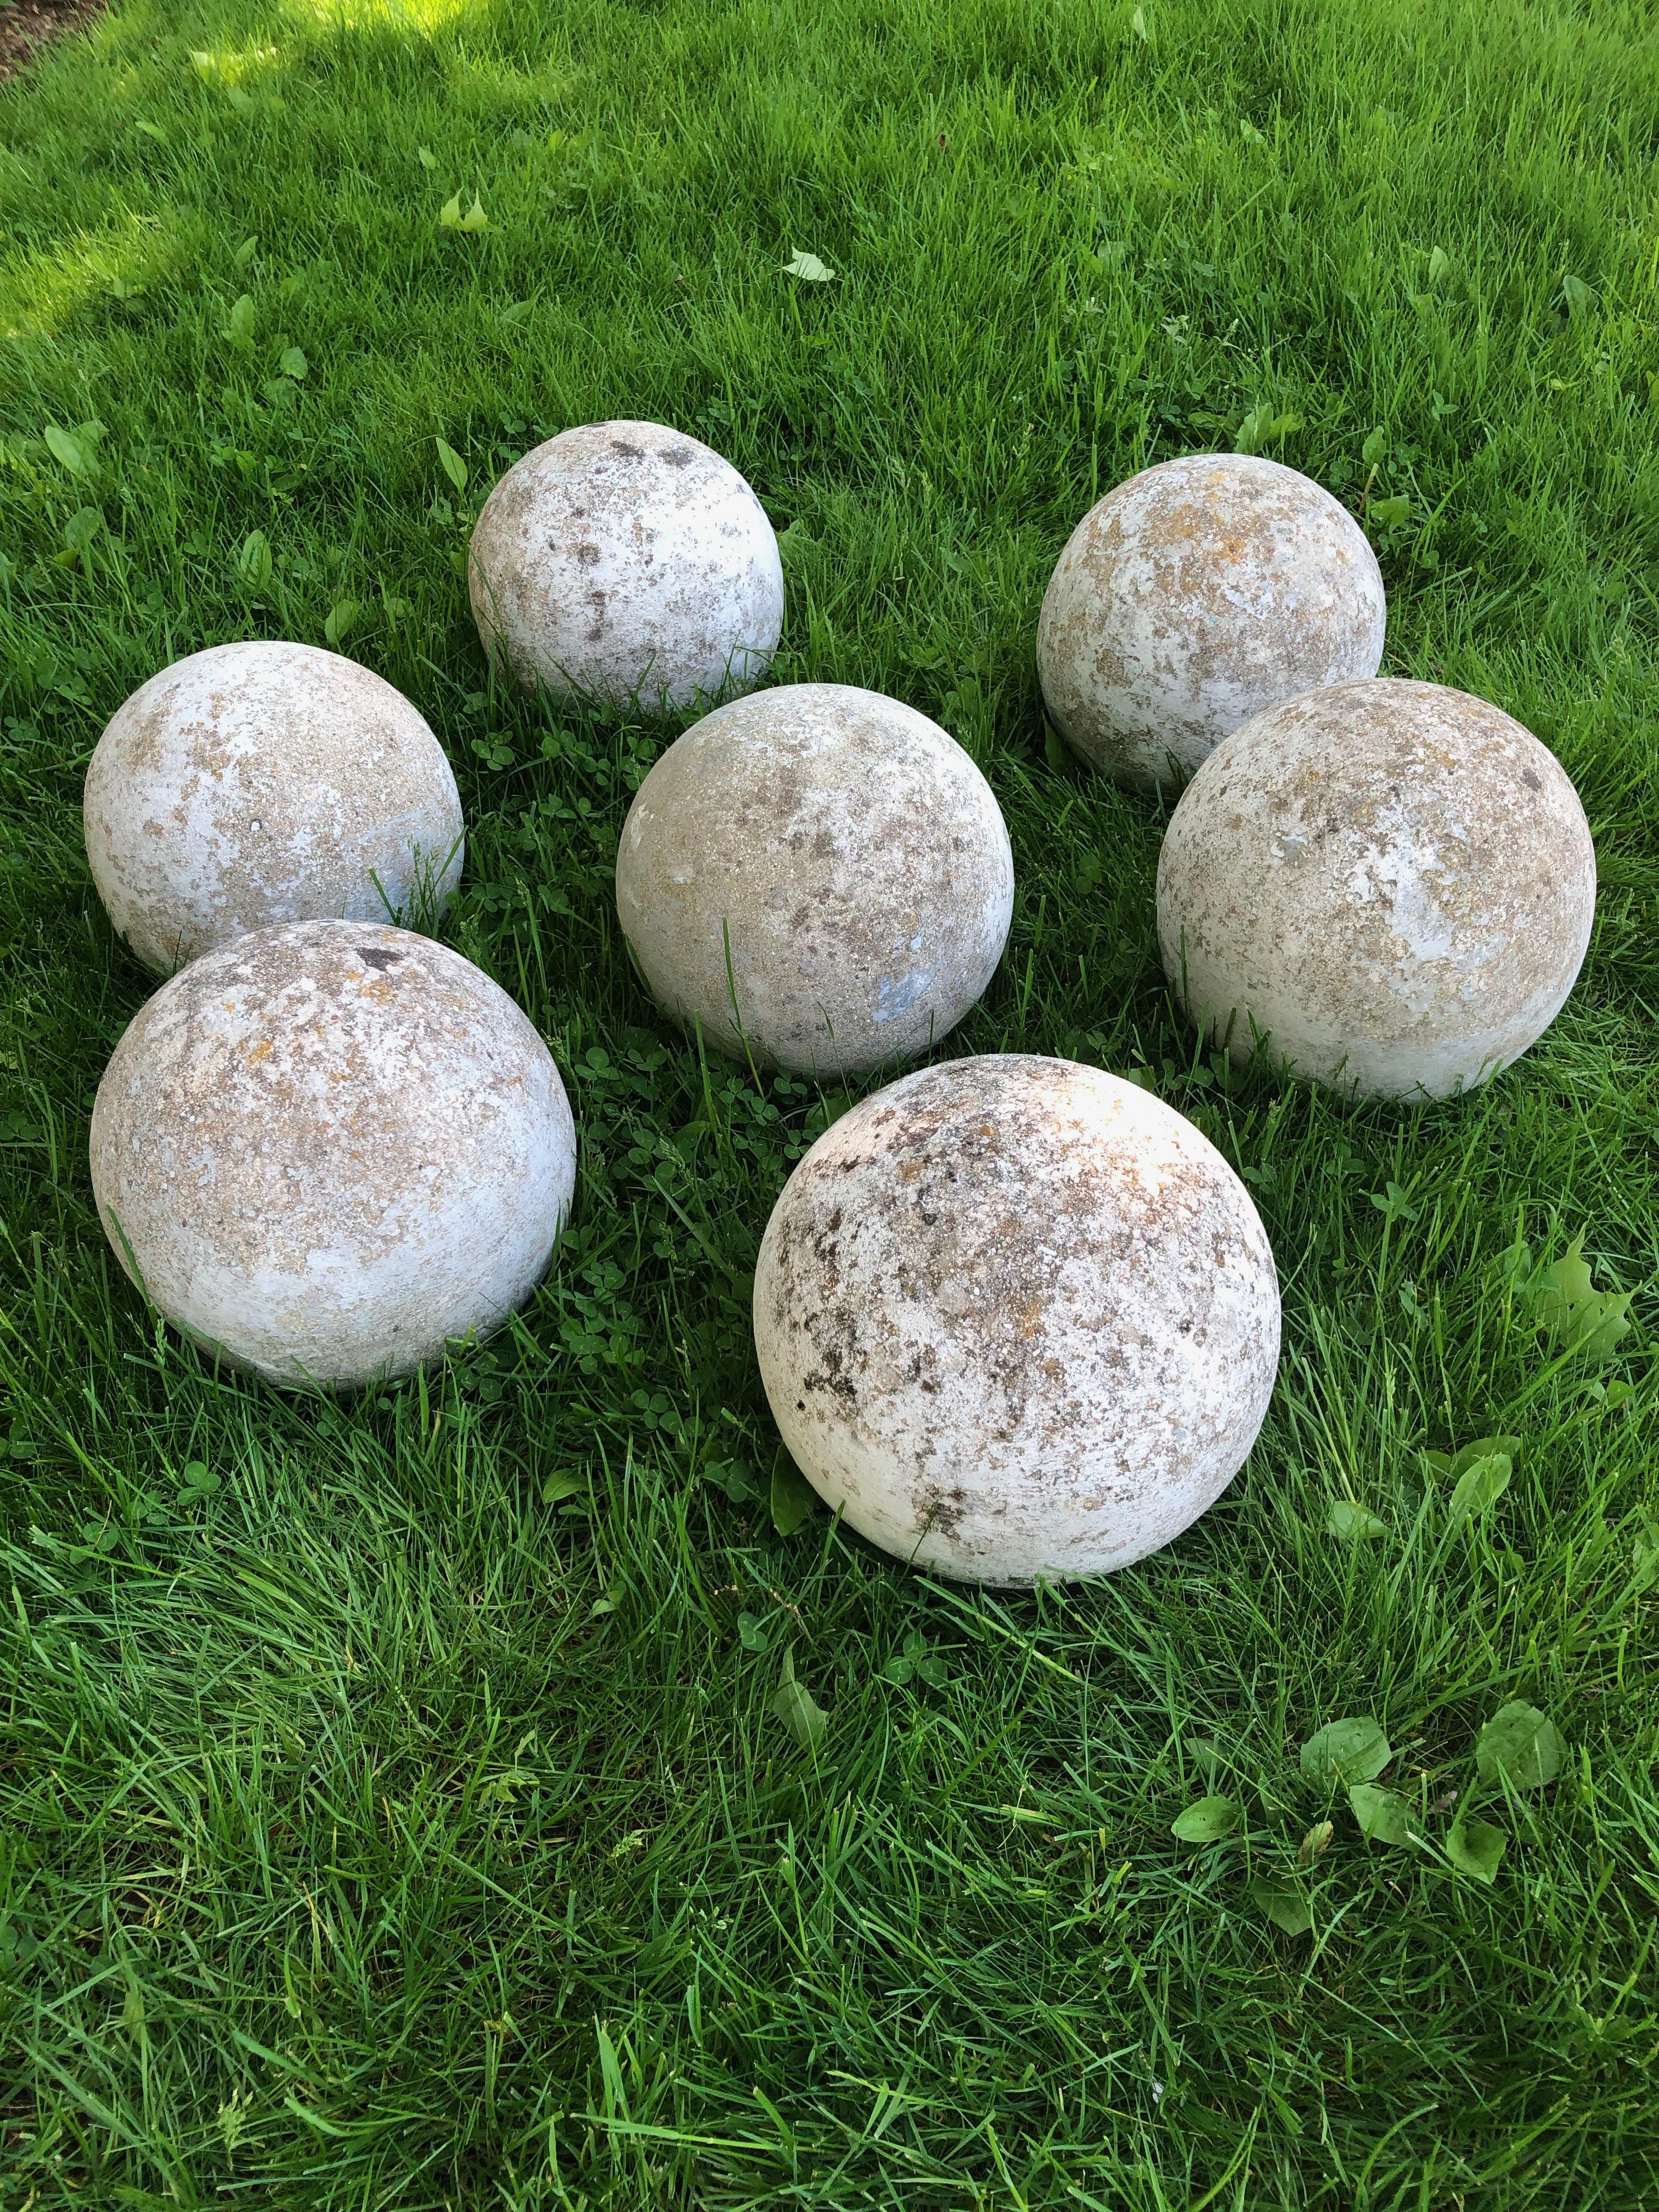 We found these balls in Provence and thought them the perfect accent for a garden bed, placed separately or in a grouping. Originally, they served as tops to finials, as evidenced by their flattened bottoms, but this feature keeps them in place so